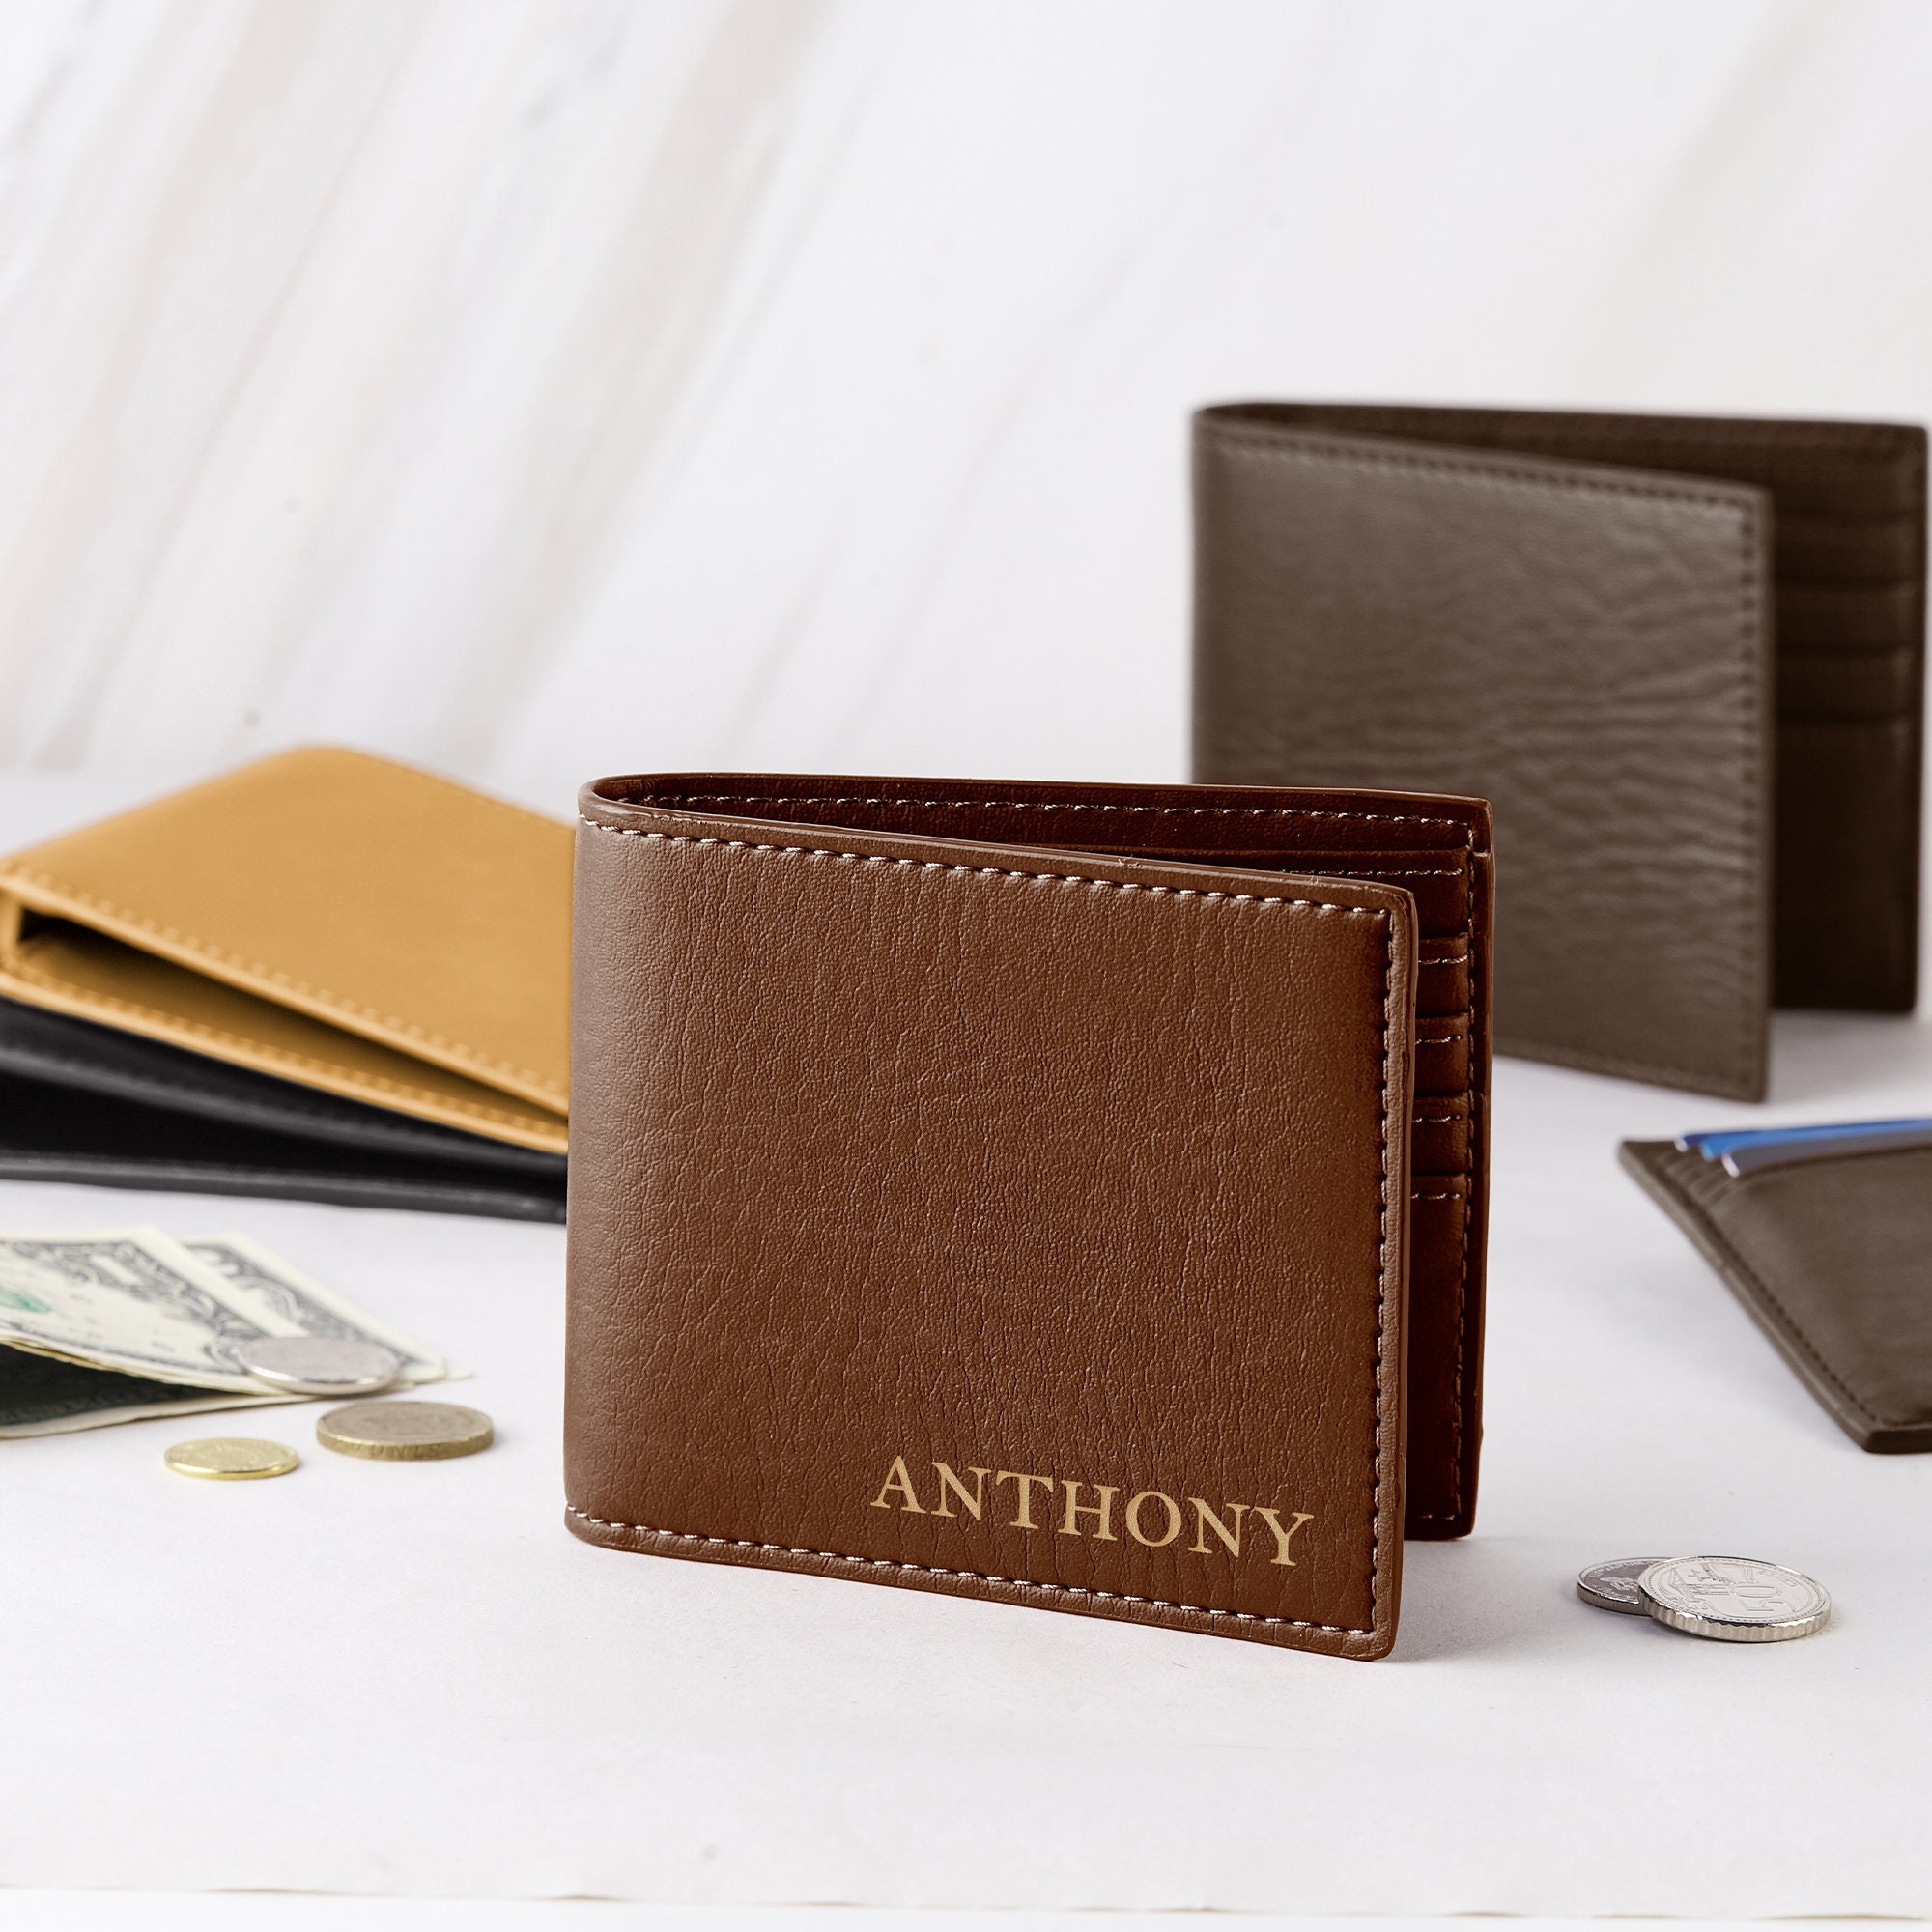 Woodland Leather Wallets - Buy Woodland Leather Wallets online in India